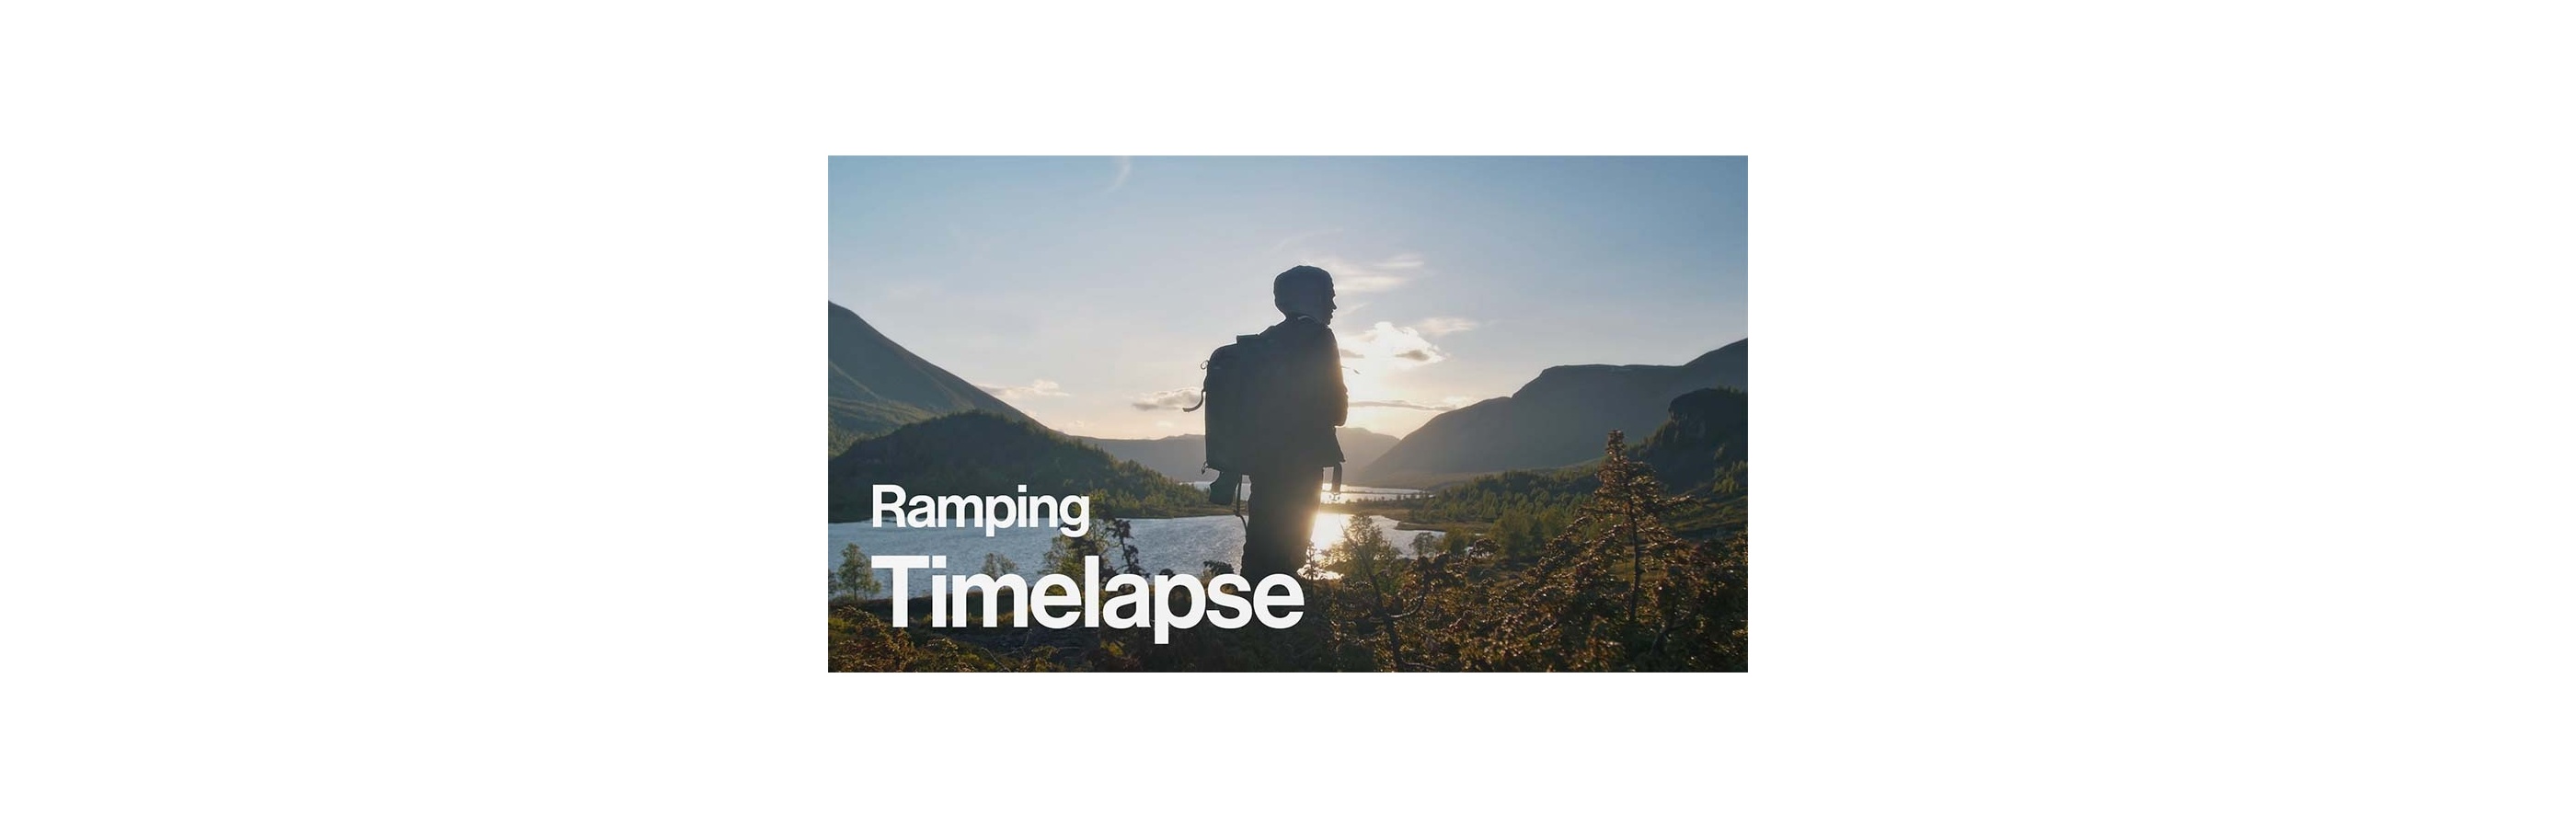 How to Shoot a Ramping Sunset Motion Time-lapse - Morten Rustad